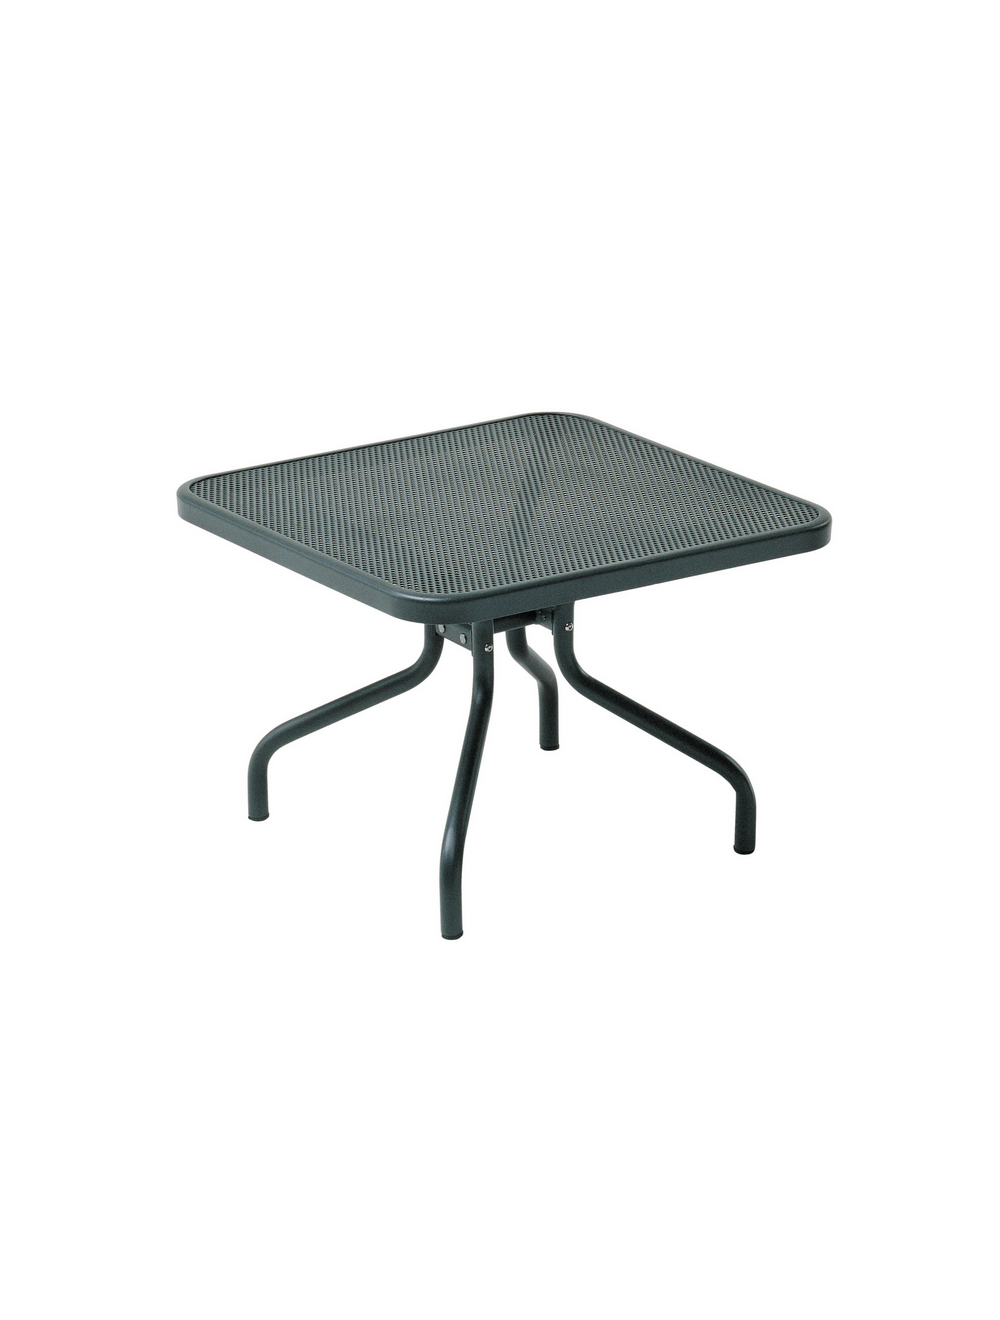 Garden square table 90x90 / outside in Steel - Collection Cambi